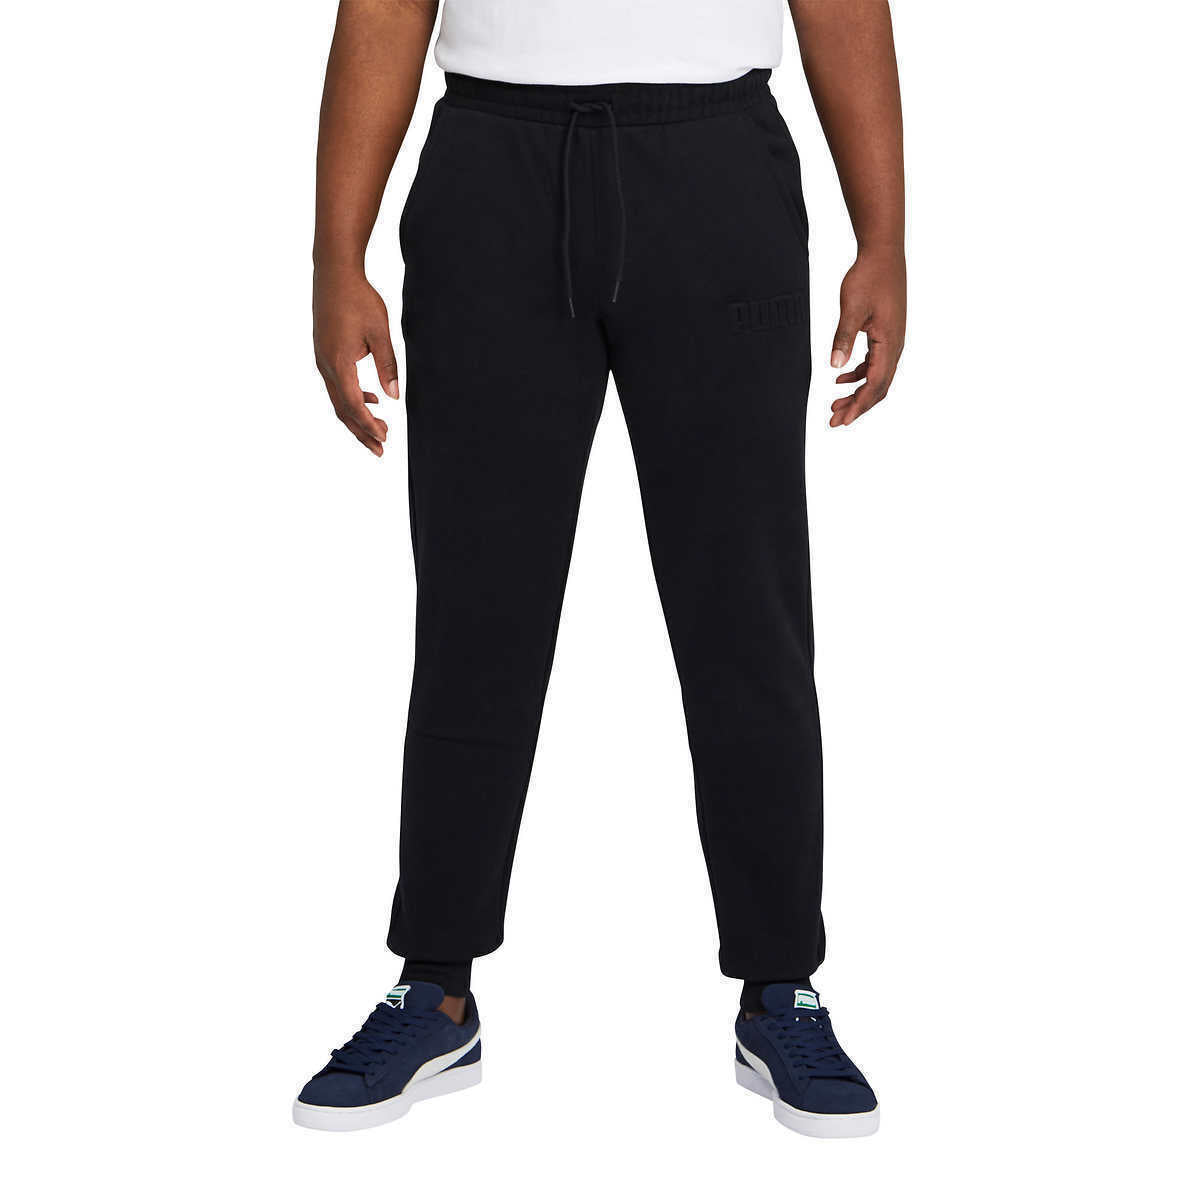 Original Puma sports pants for men, in several colors from Puma